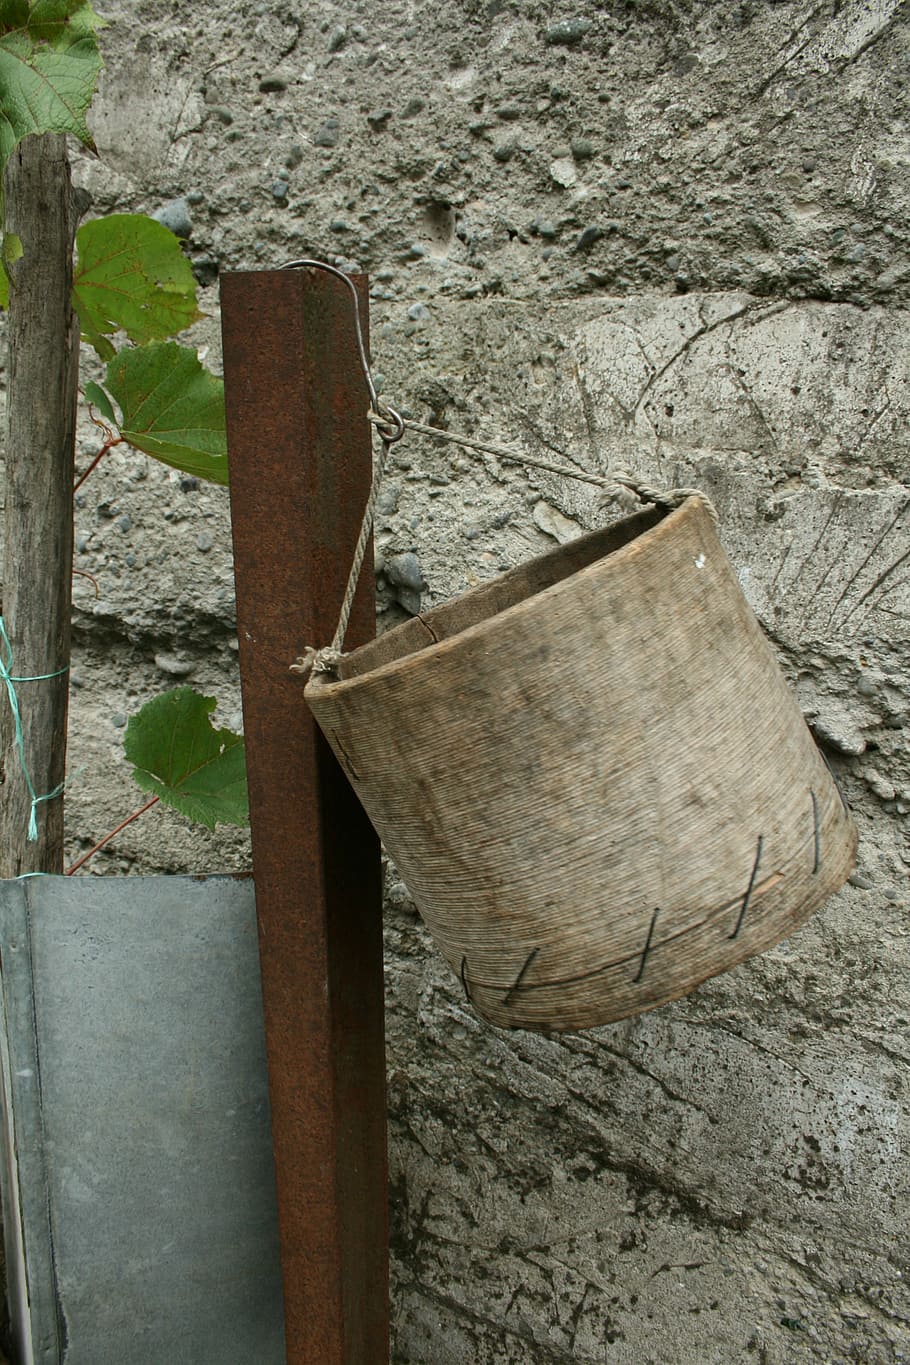 Bucket, Georgia, Village, Economy, ancient, old-fashioned, antique, day, outdoors, close-up